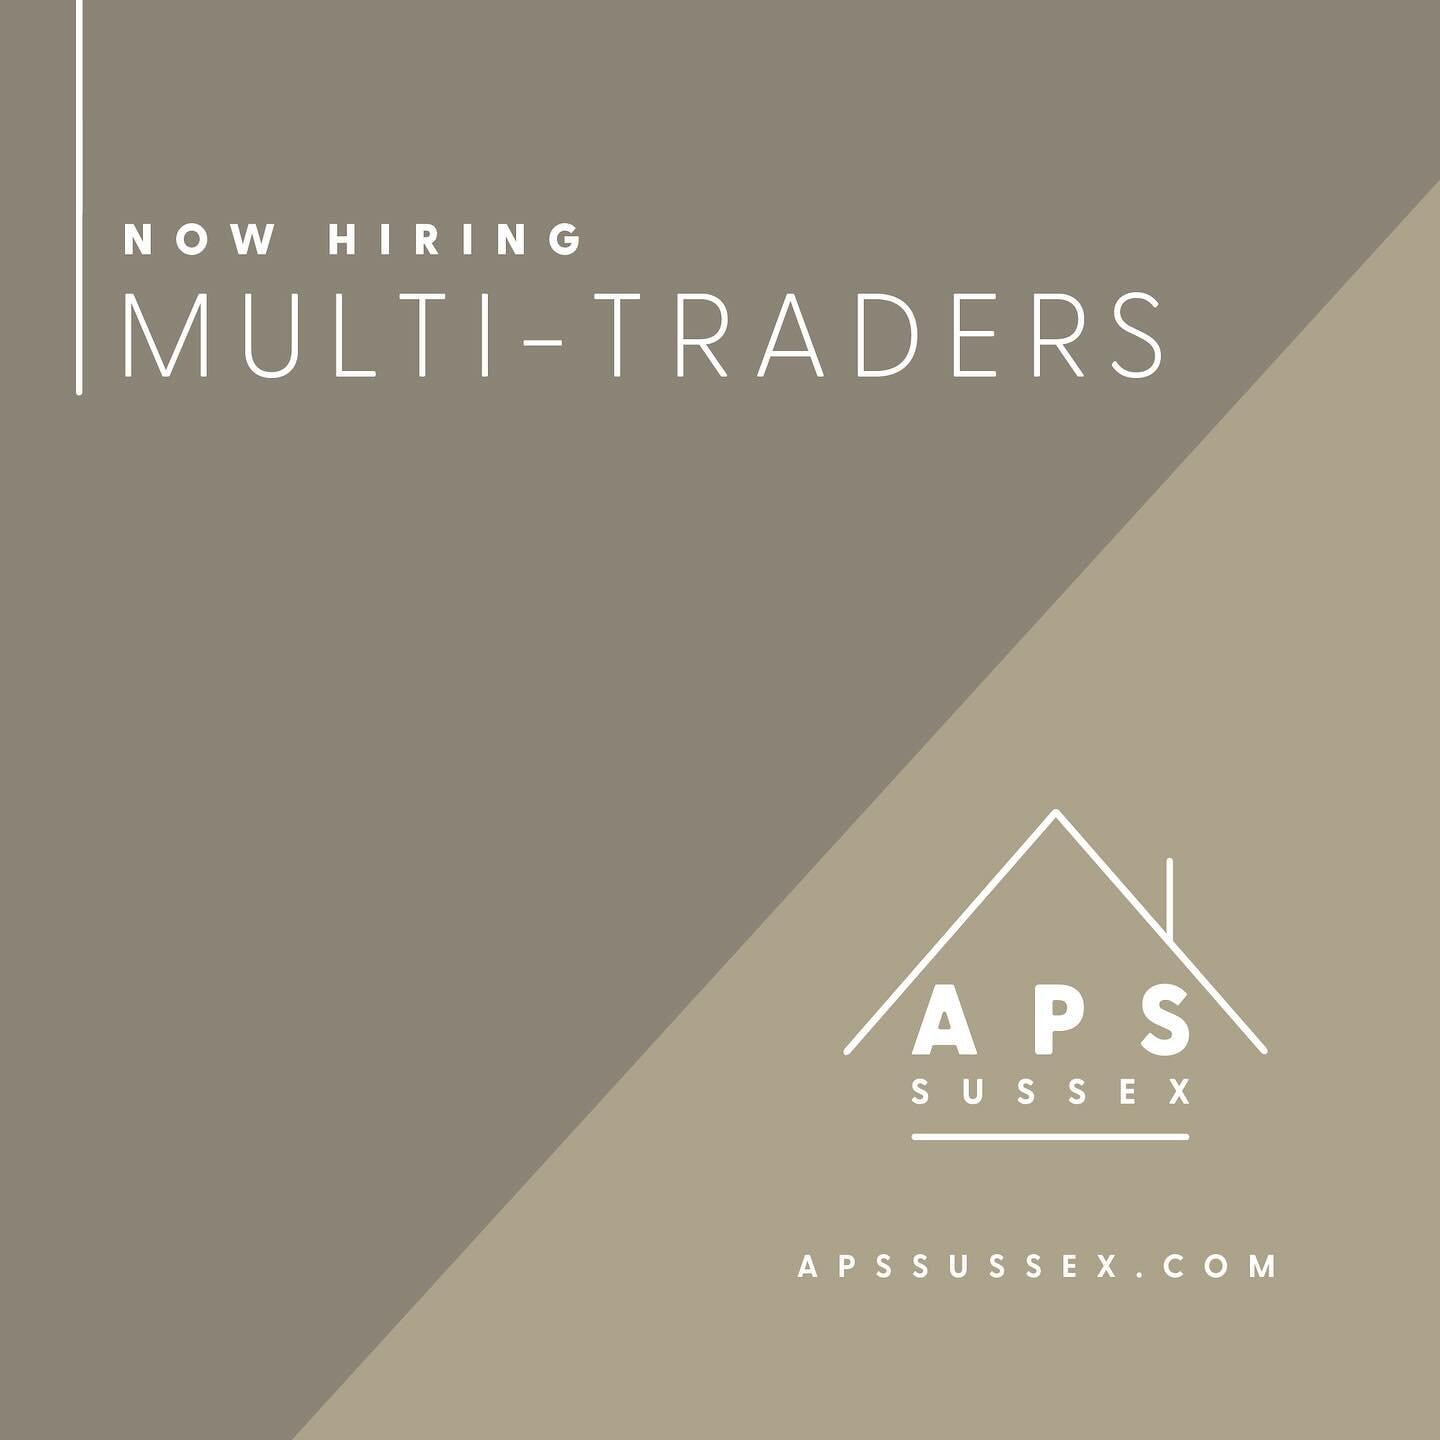 We're now hiring for experienced Multi-Traders. 

If you're looking for work send us an email to work@apssussex.com or DM us 📩